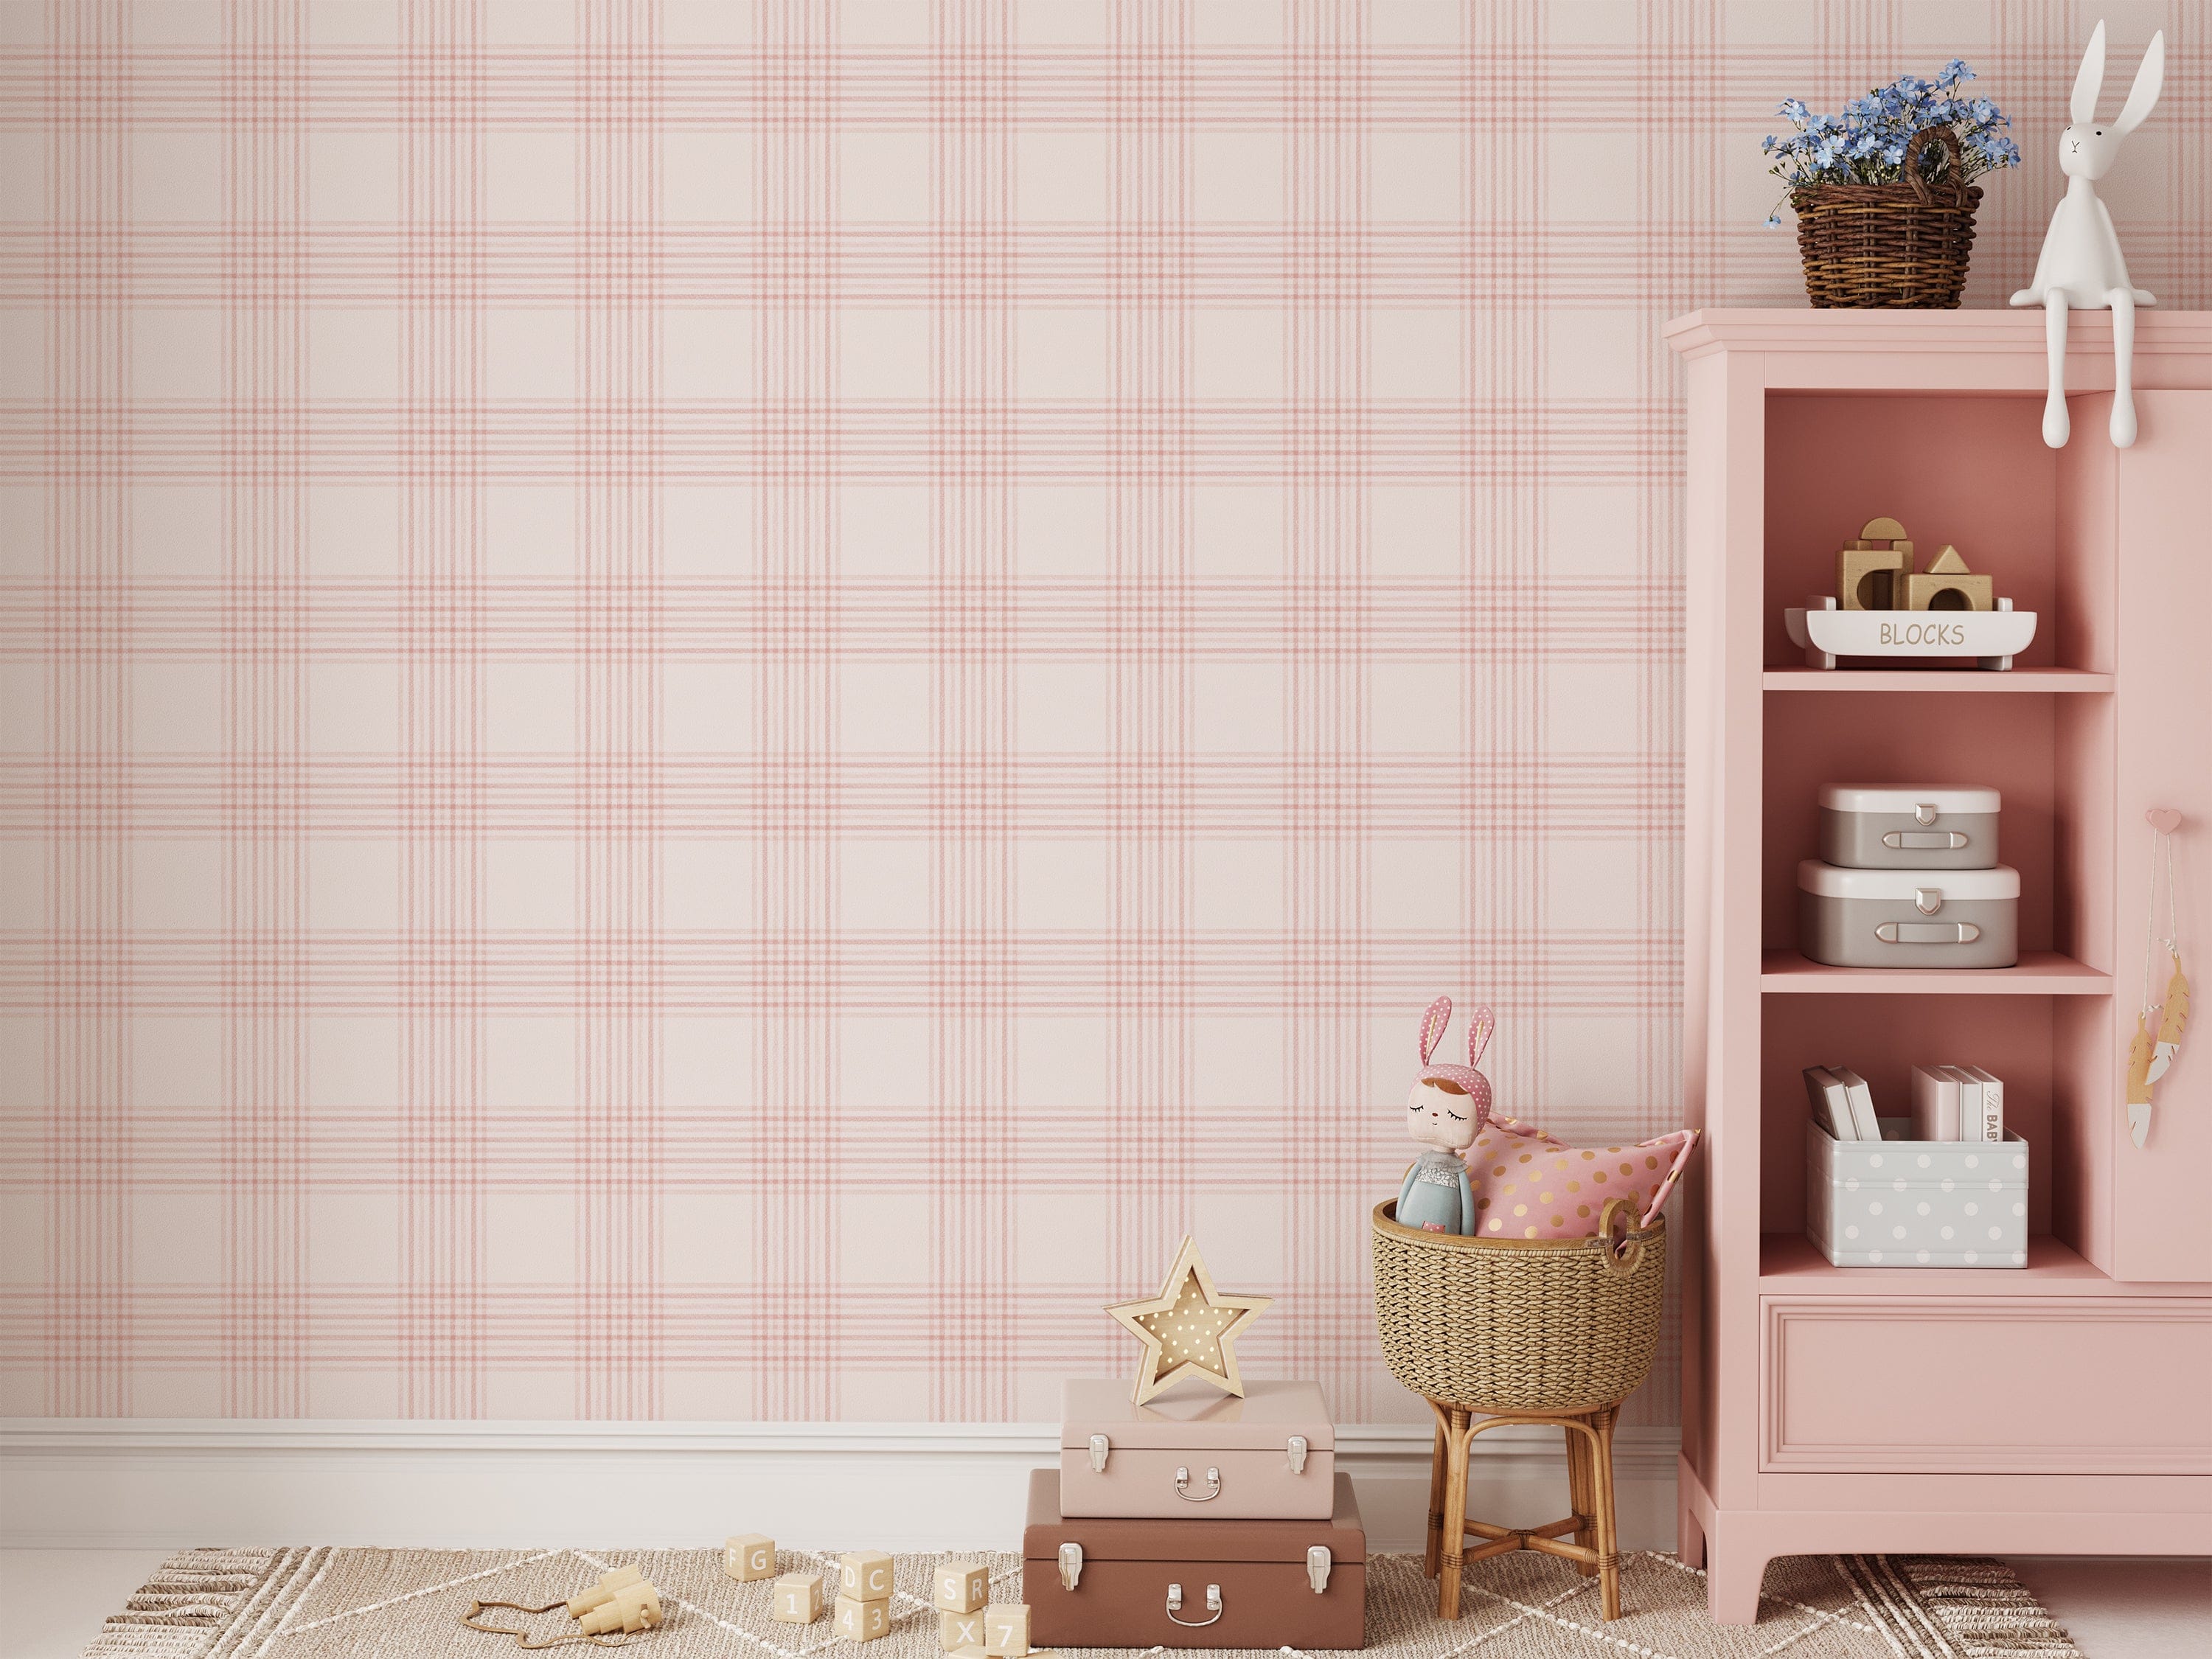 A cozy nursery with a pink bookshelf and children's toys against a wall covered in pink plaid wallpaper. The wallpaper features a soft pink and white checkered pattern, creating a warm and welcoming atmosphere. The bookshelf holds books, baskets, and a stuffed bunny, enhancing the playful and charming look of the room.